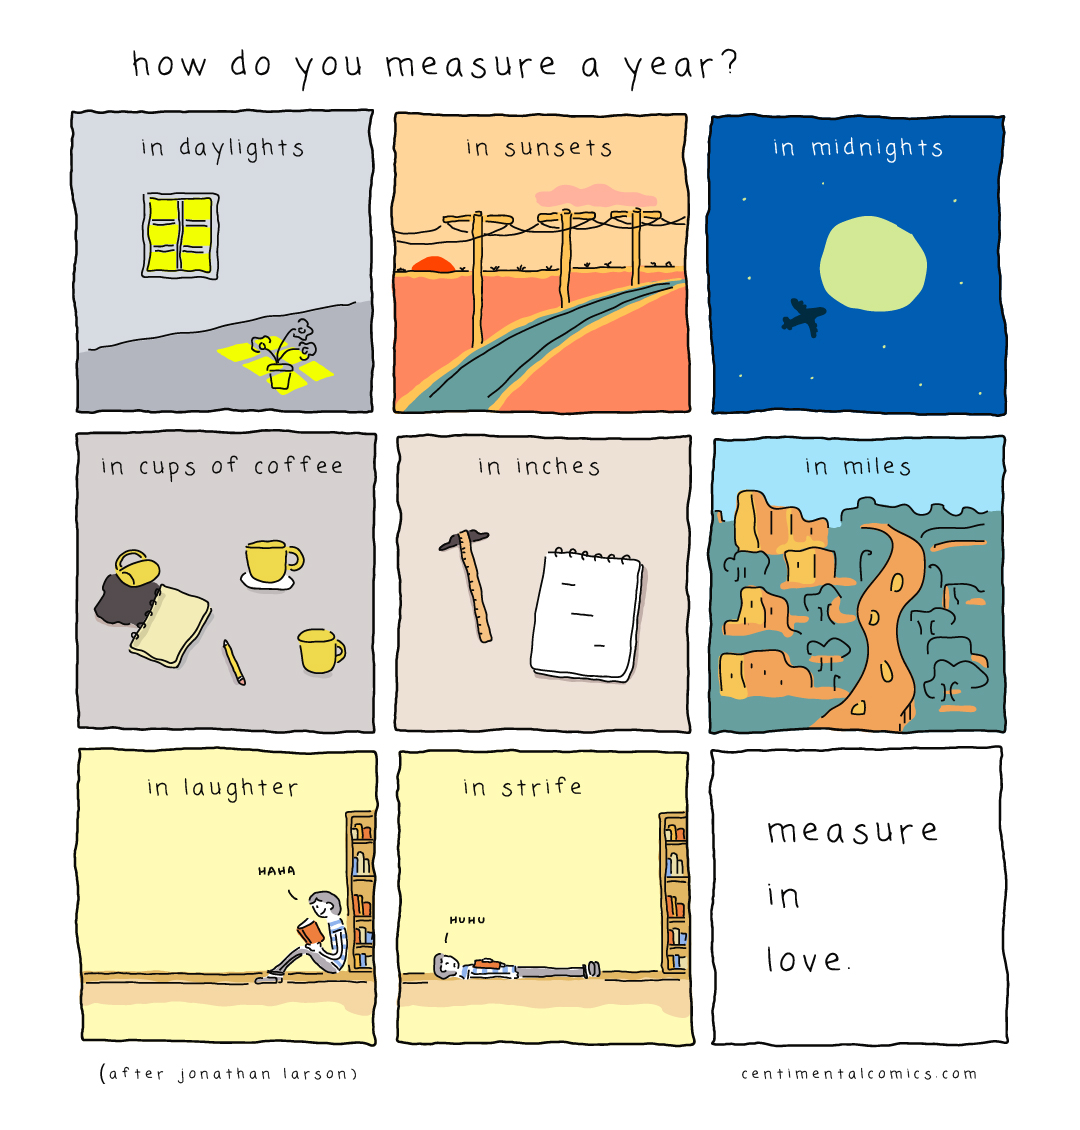 how do you measure a year